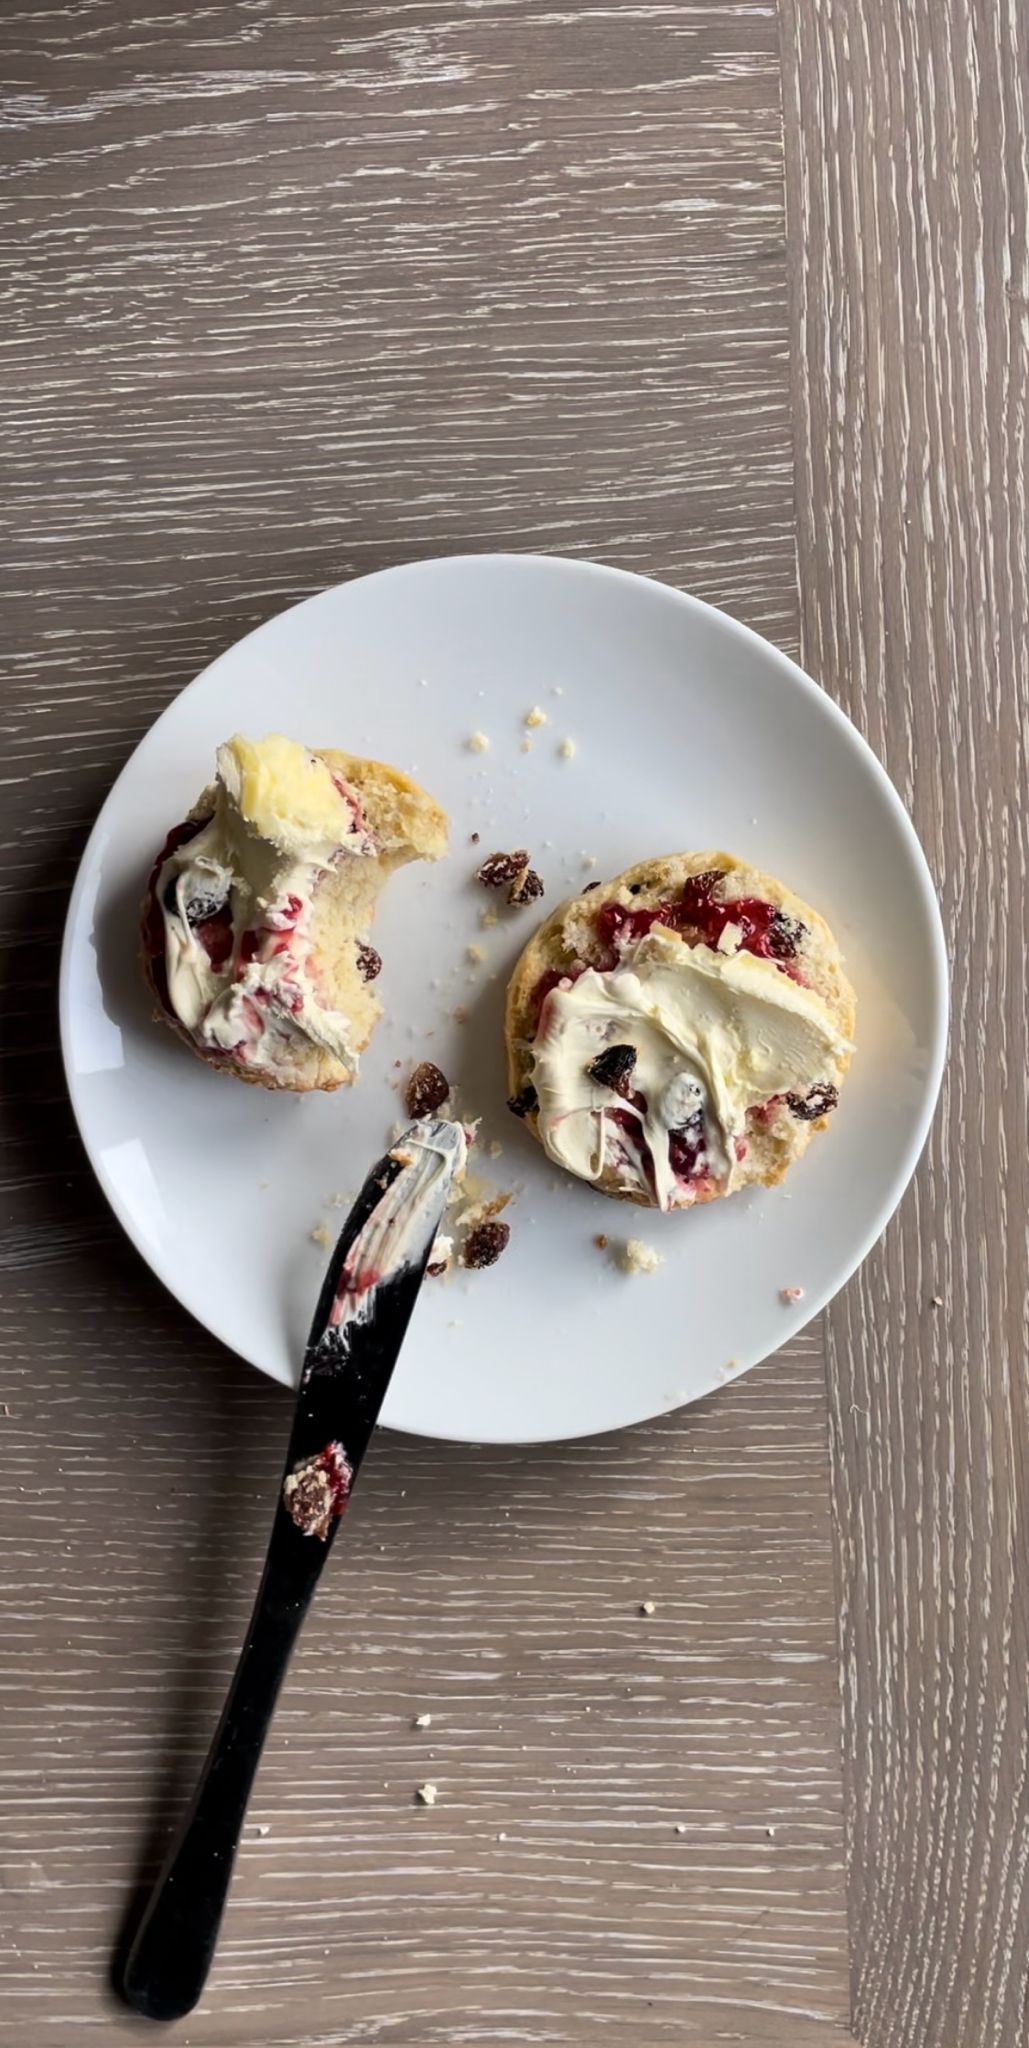 Crumbs! Get the doughdown on this no nonsense British scone